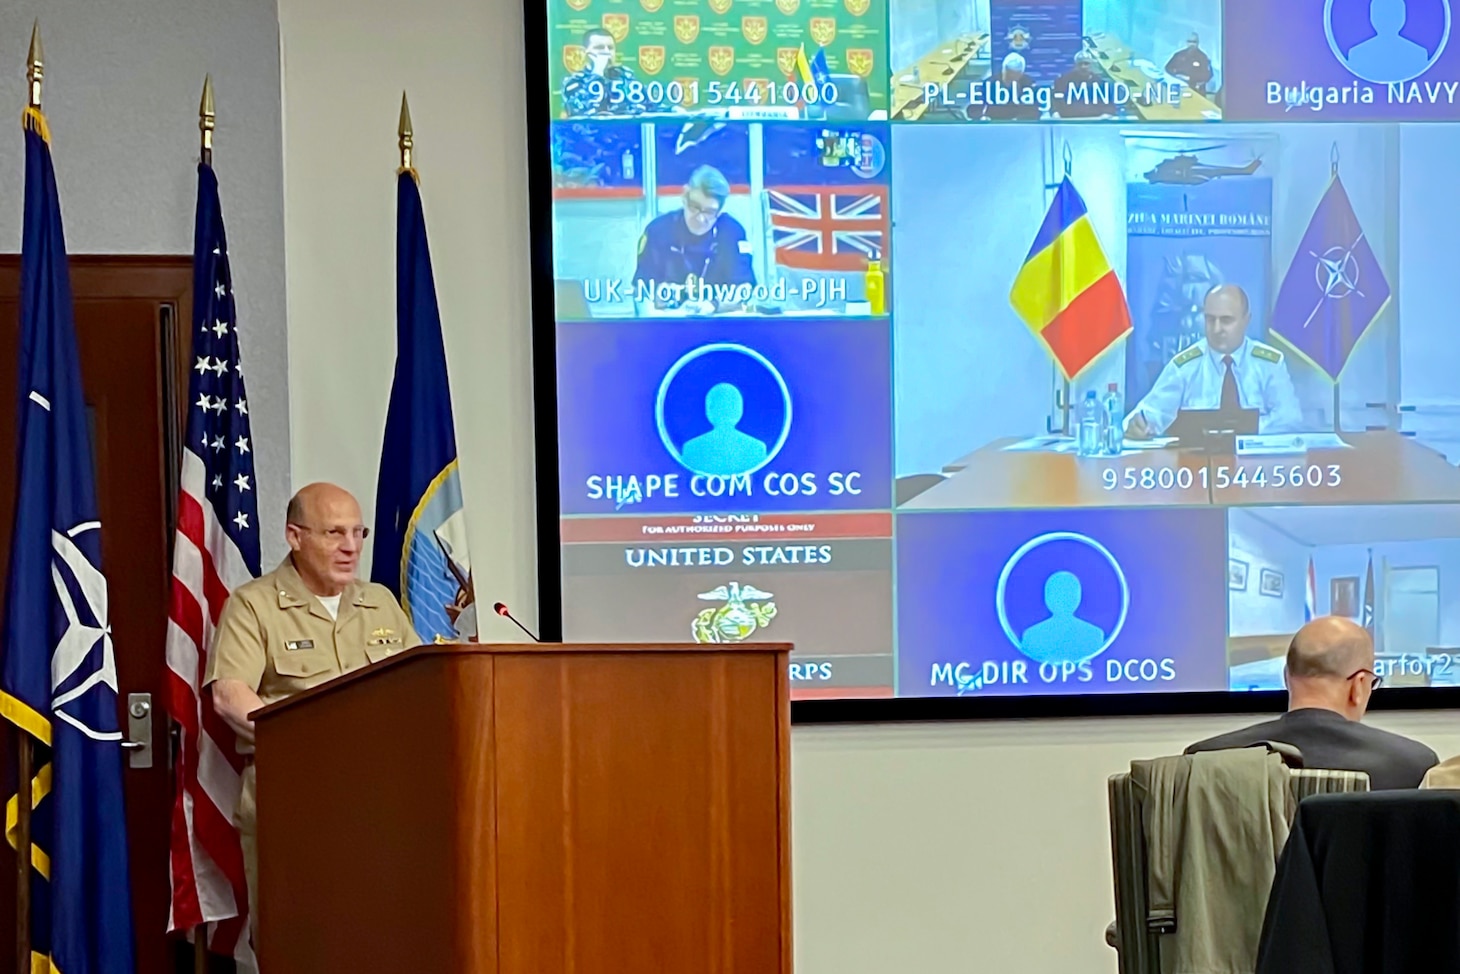 Chief of Naval Operations (CNO) Adm. Mike Gilday delivers opening remarks to the Future Maritime Warfare Symposium.